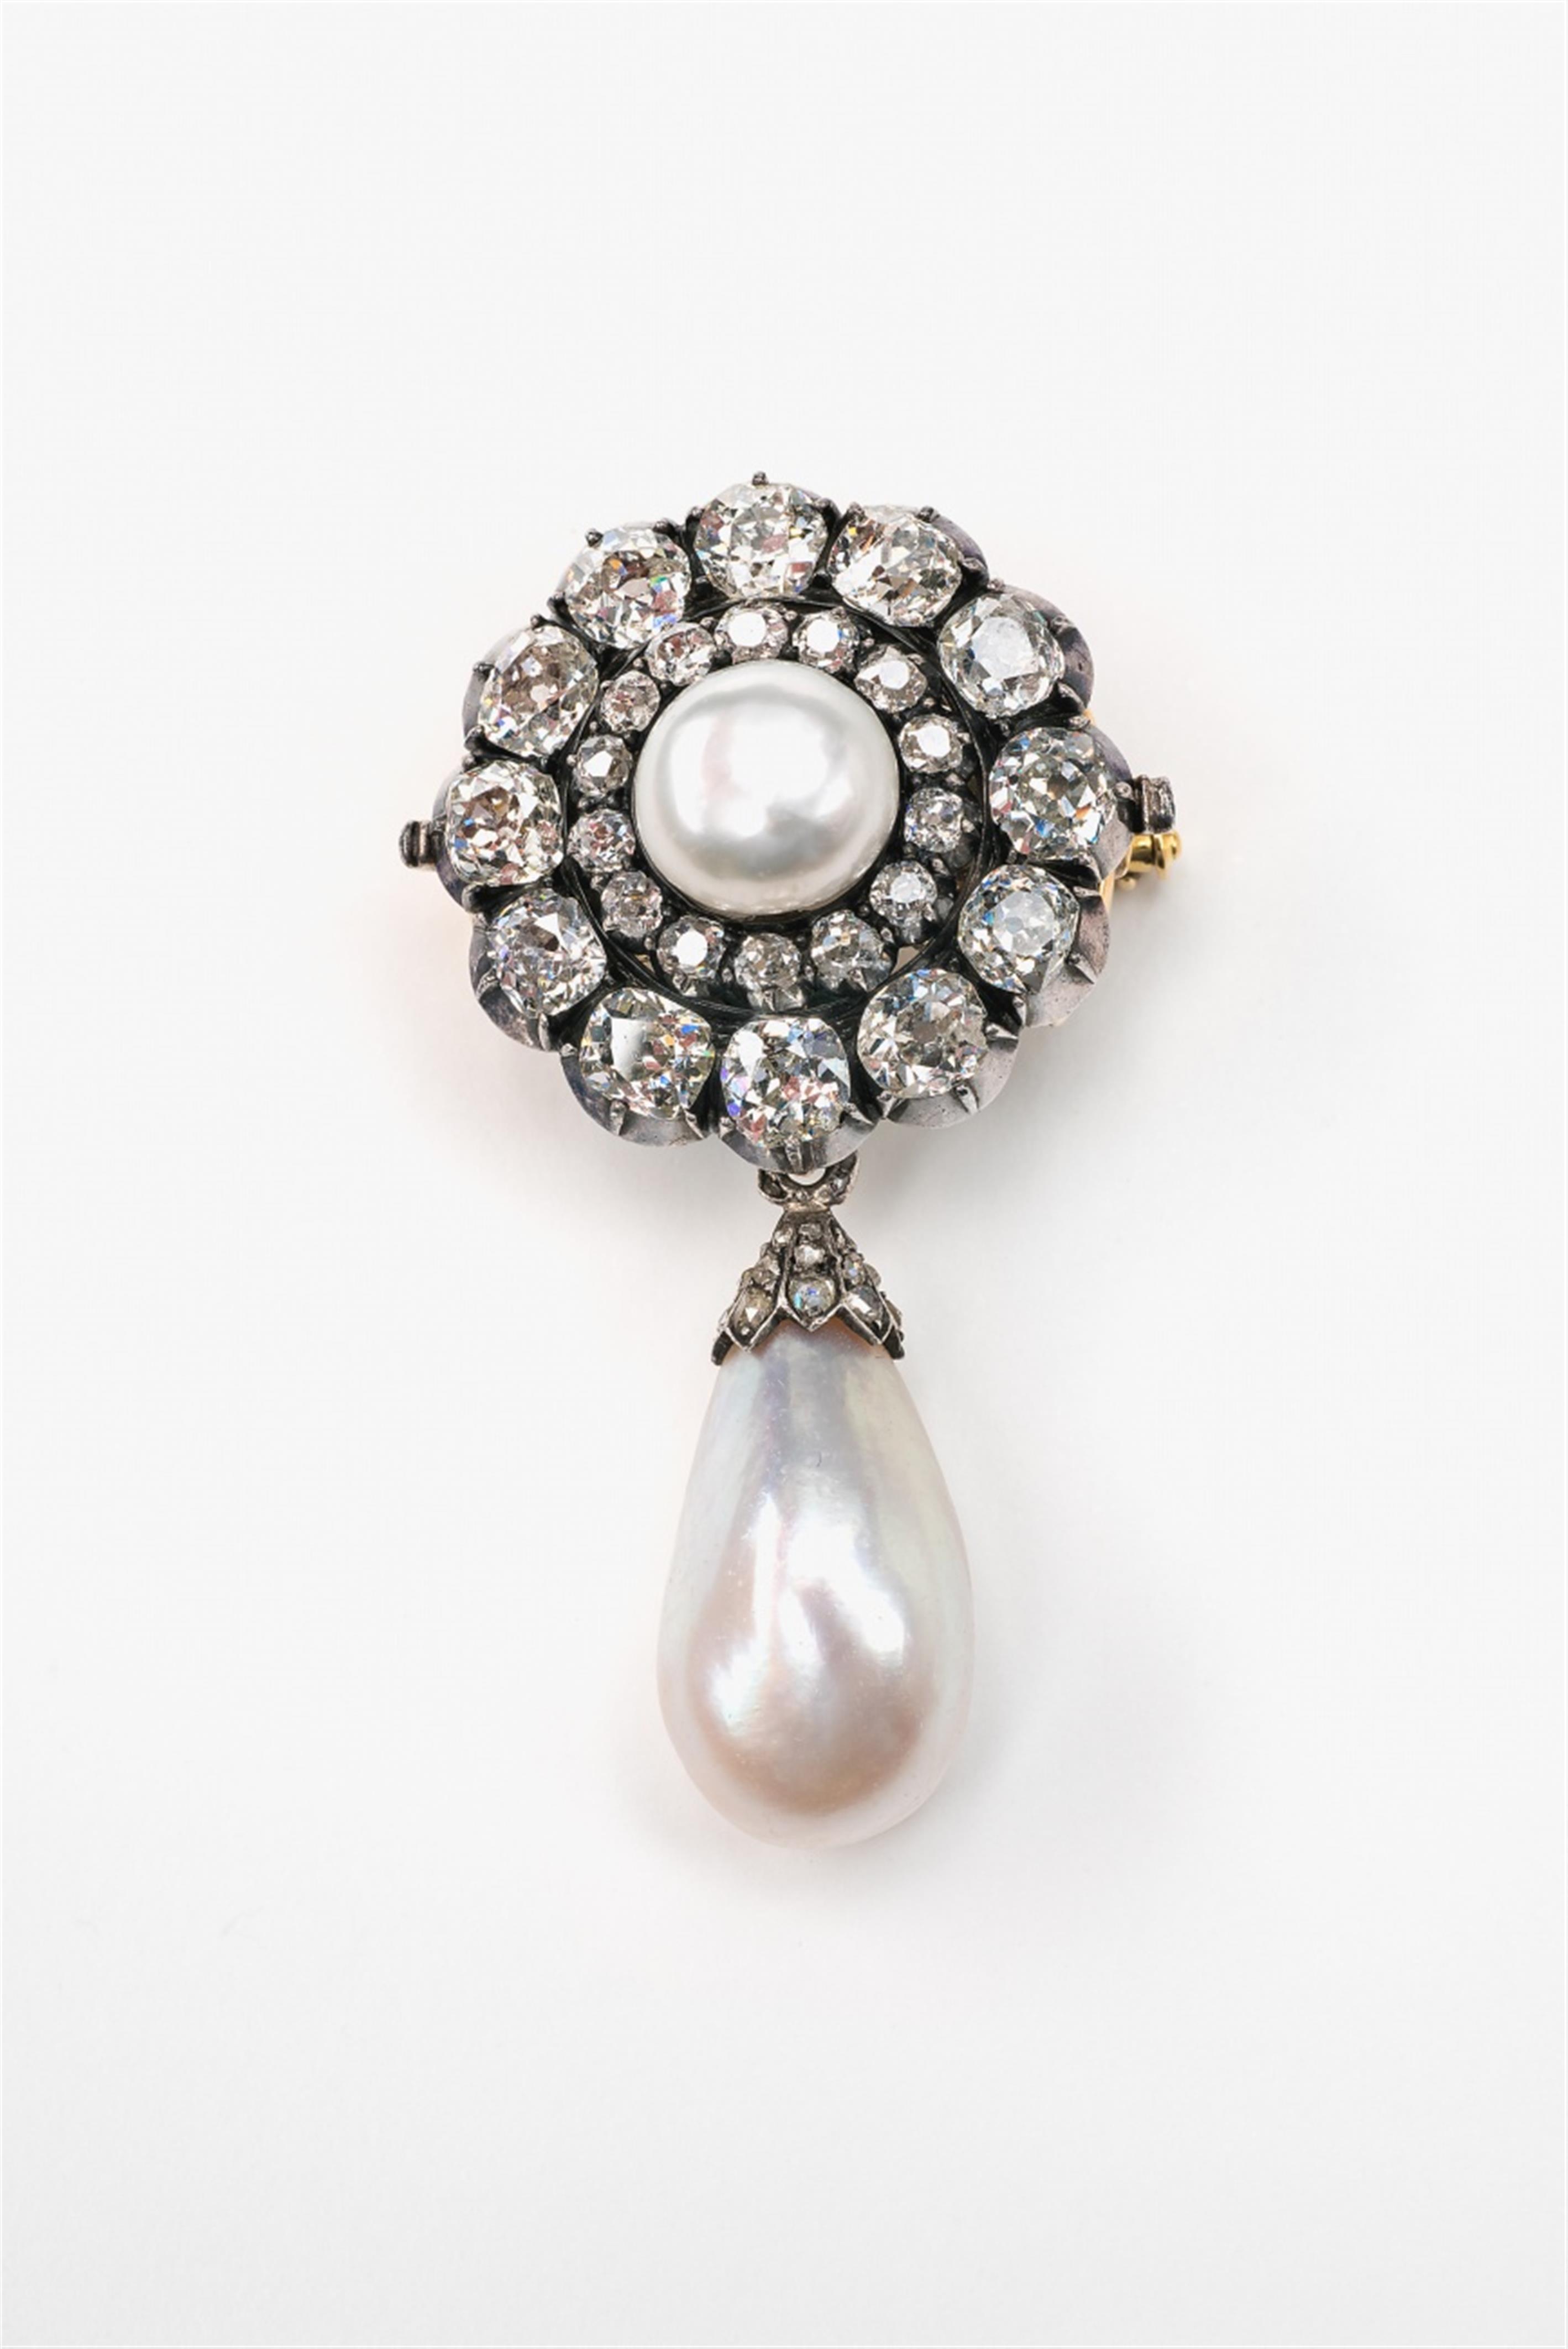 A 14k gold, silver and natural pearl brooch - image-1